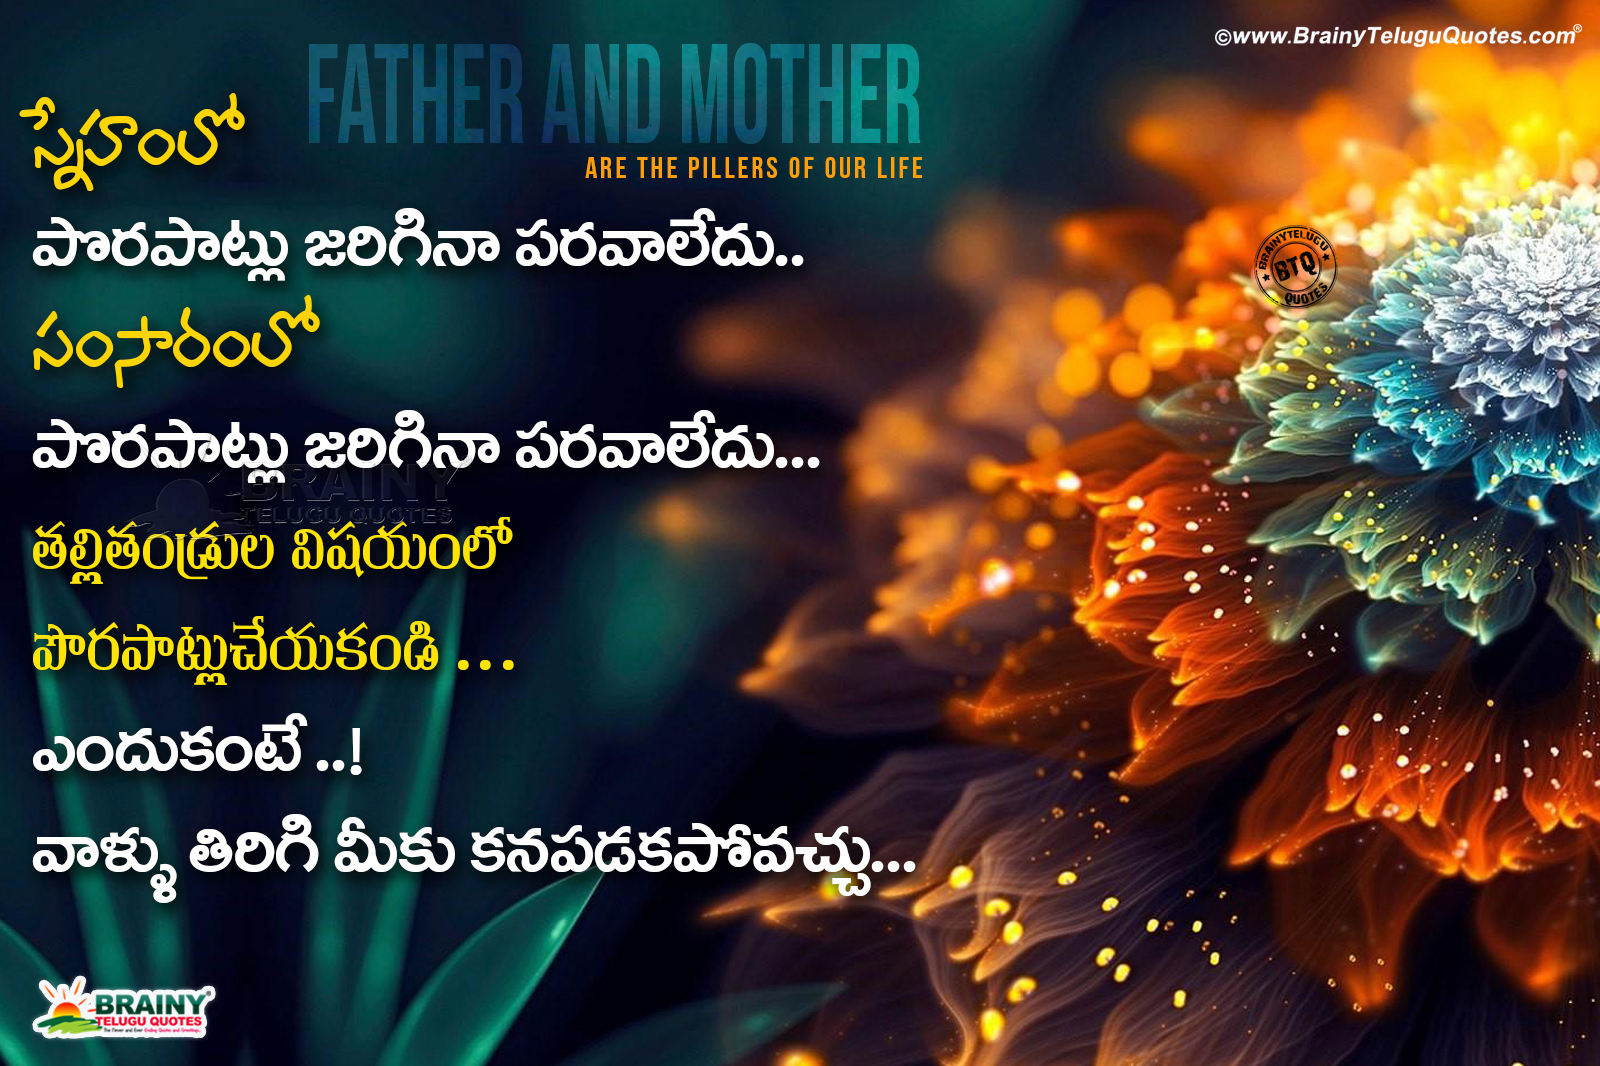 Father Mother Quotes In Telugu Heart Touching Importance Of Father And Mother Quotes Brainyteluguquotes Comtelugu Quotes English Quotes Hindi Quotes Tamil Quotes Greetings